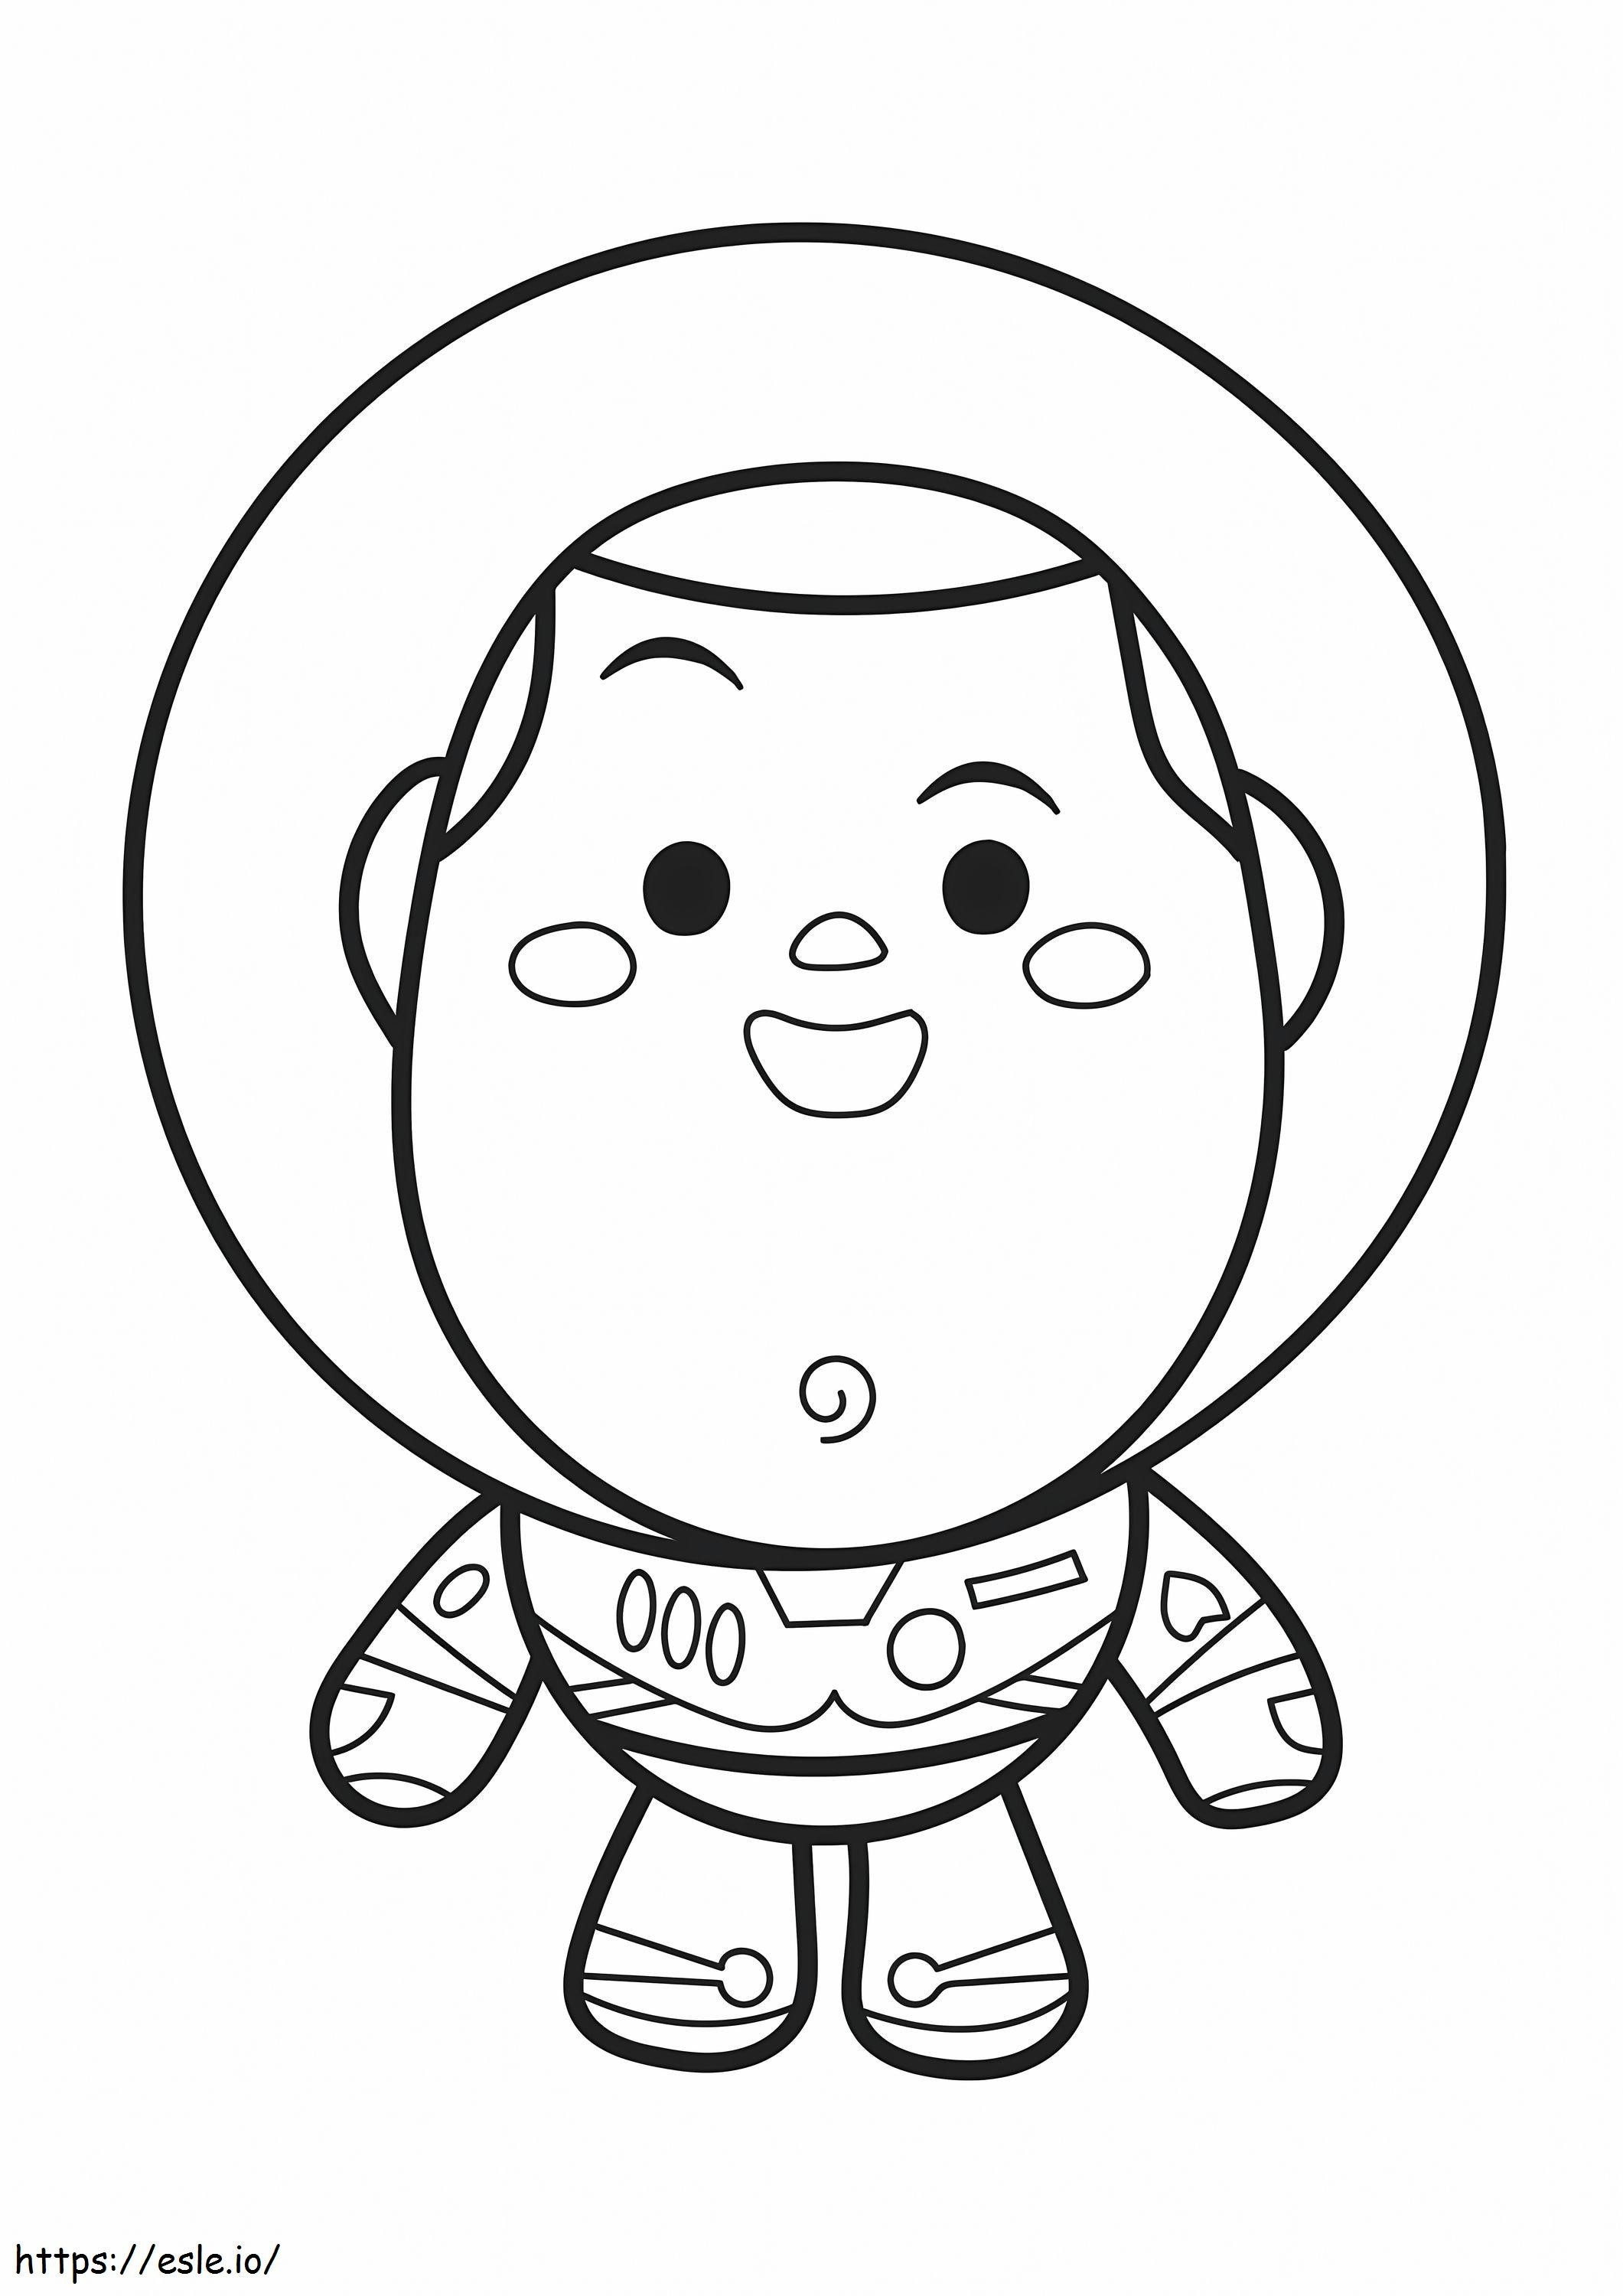 Chibi Buzz Lightyear coloring page